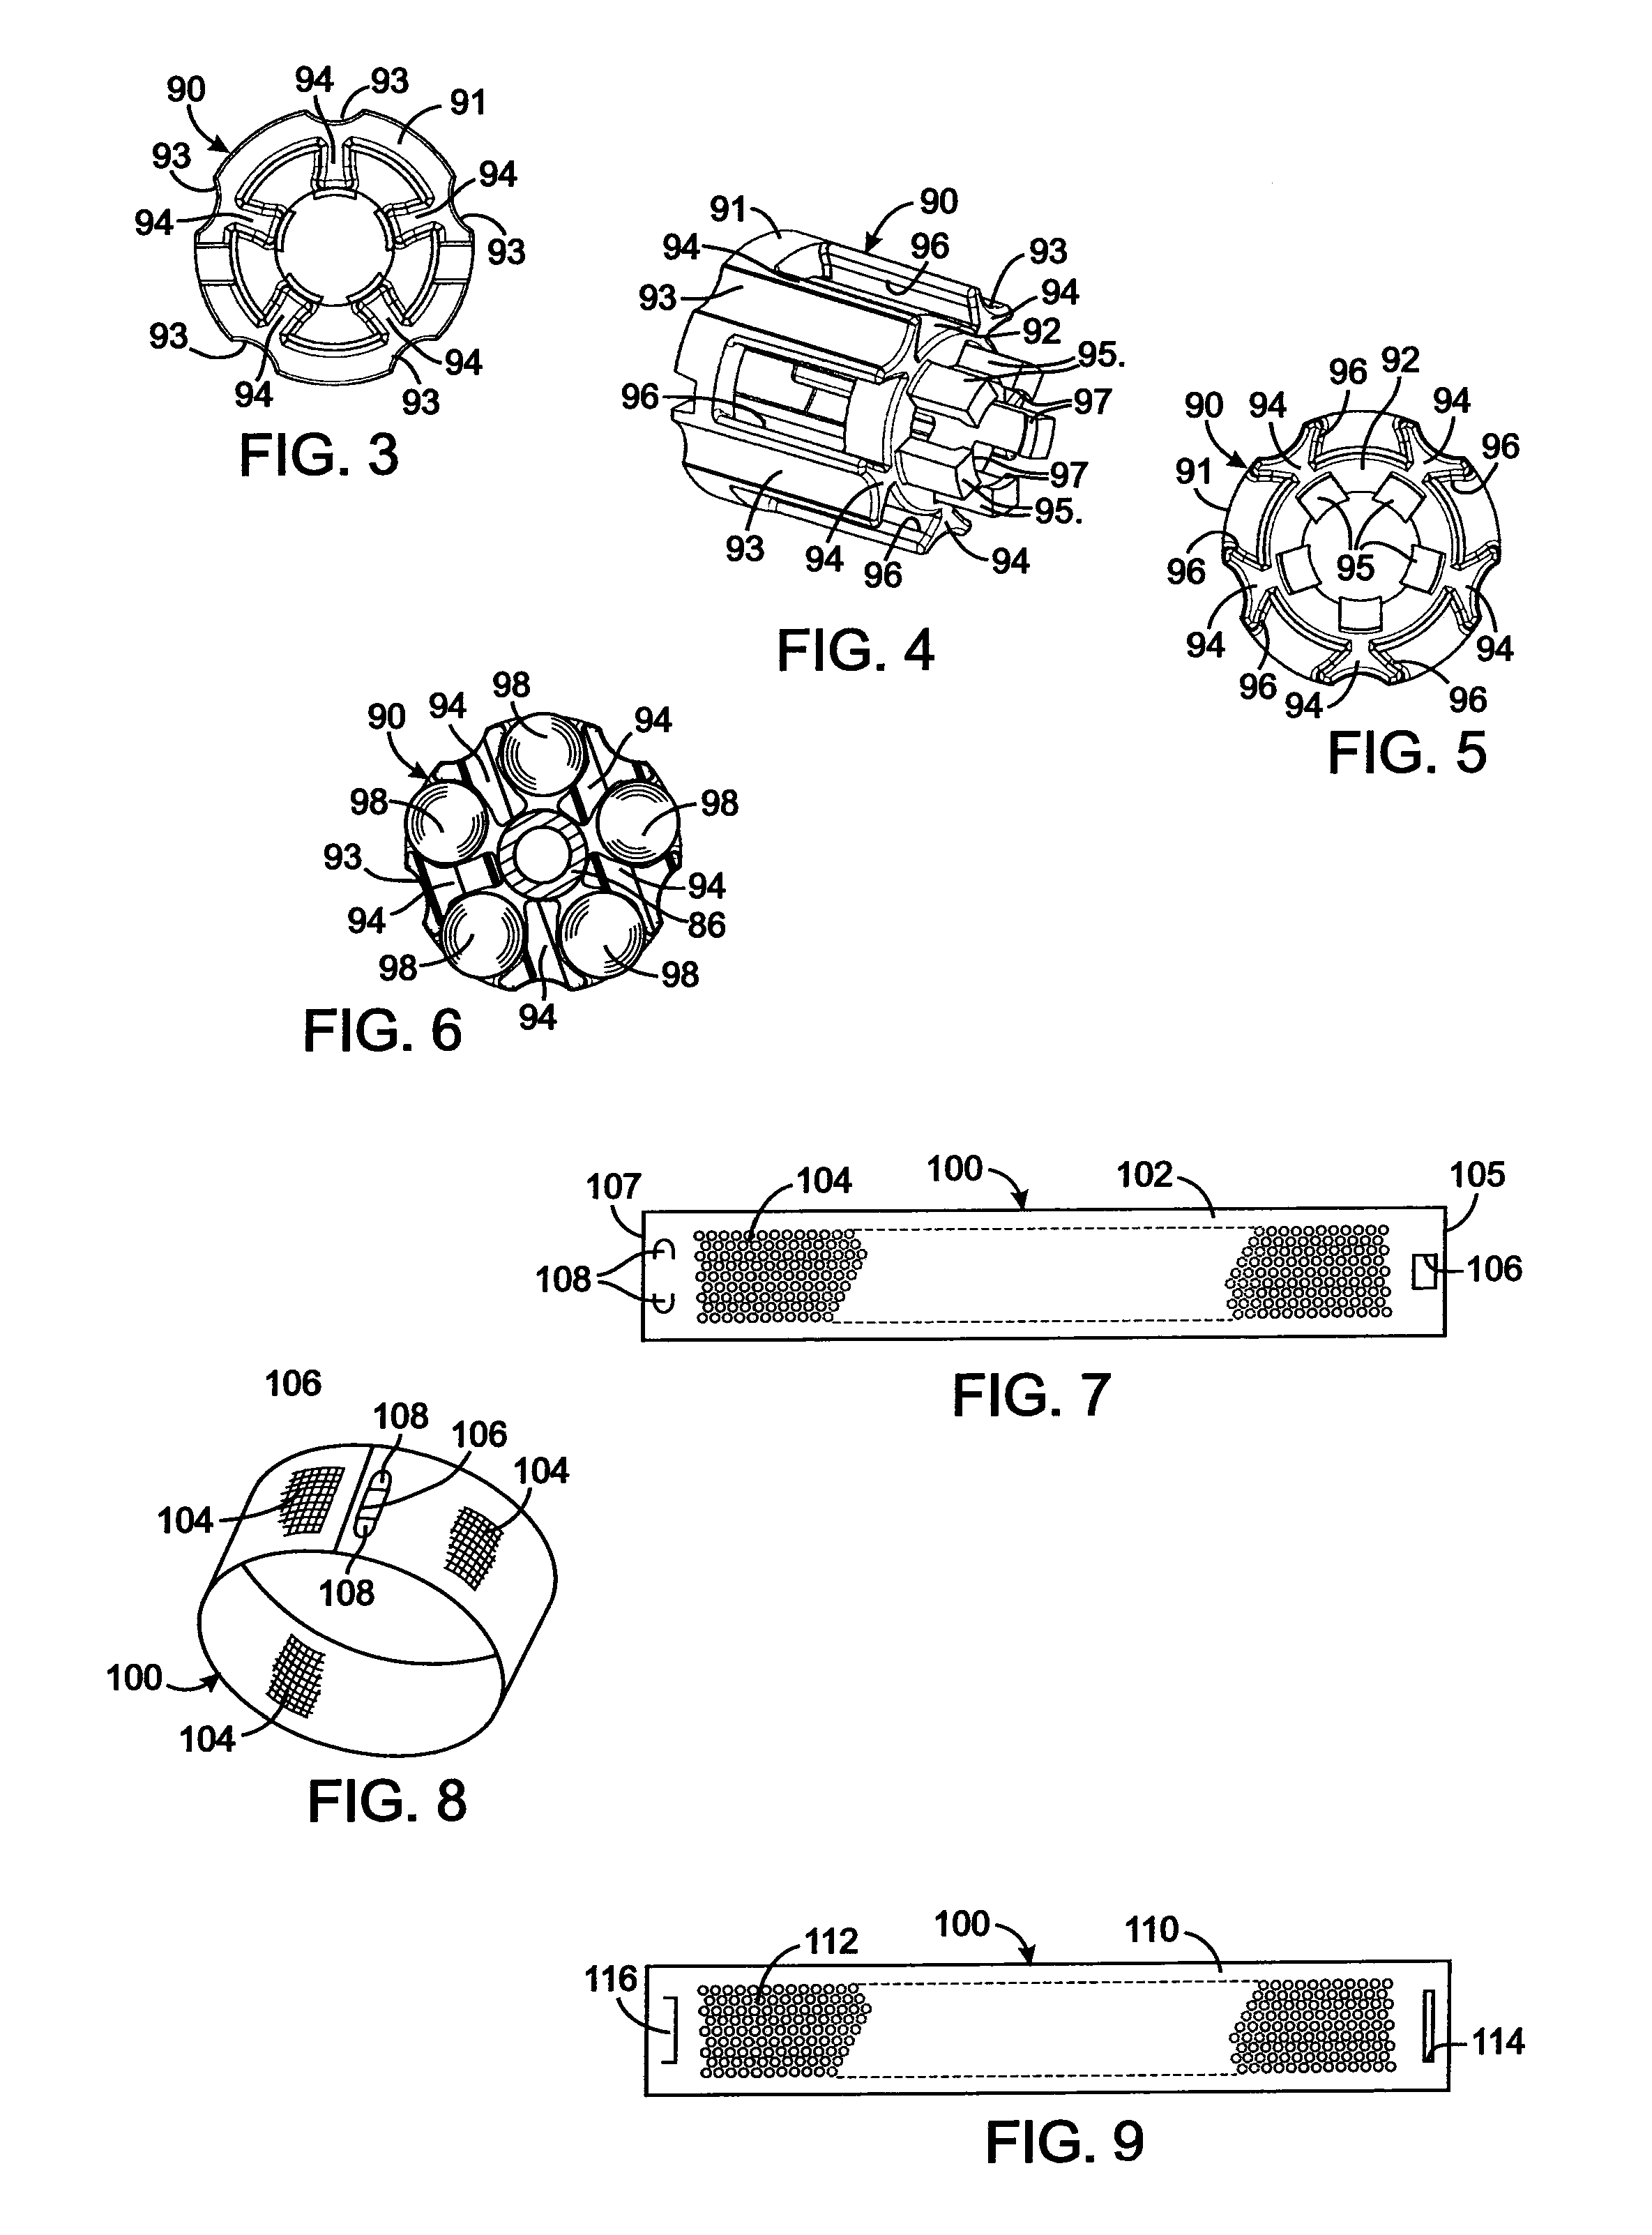 Filter band for an electrohydraulic valve